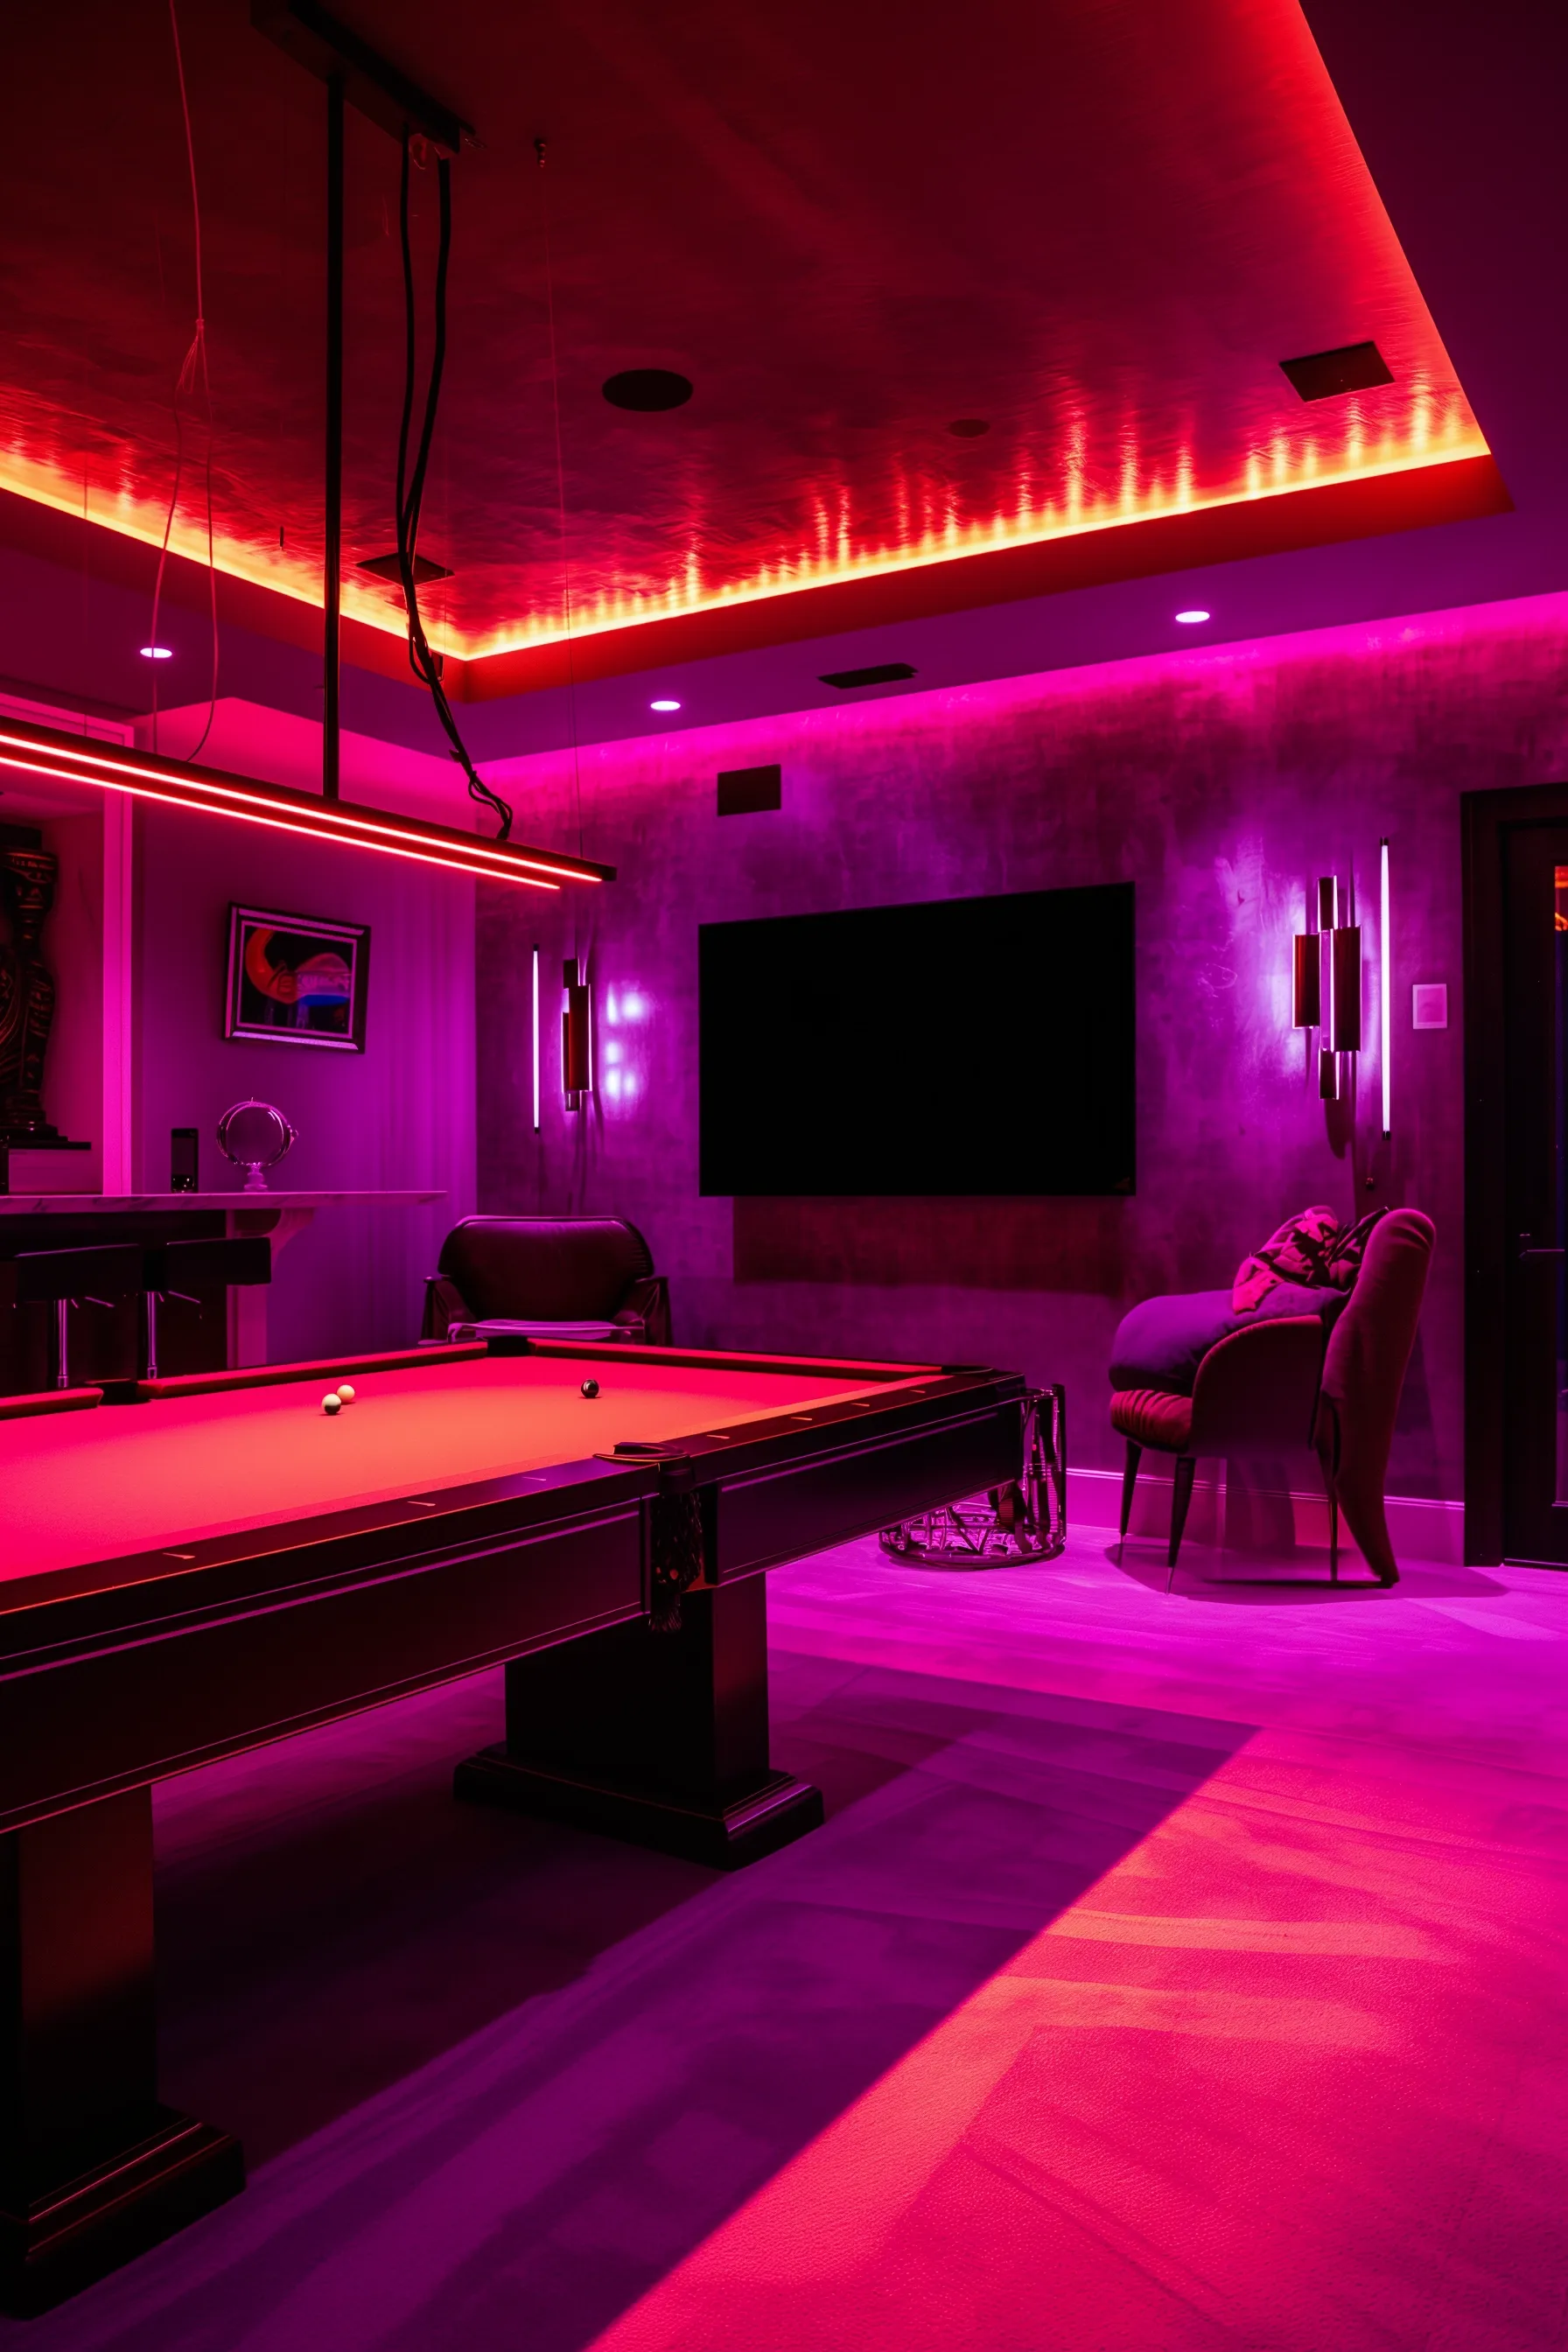 Pink pool table with LED light strips